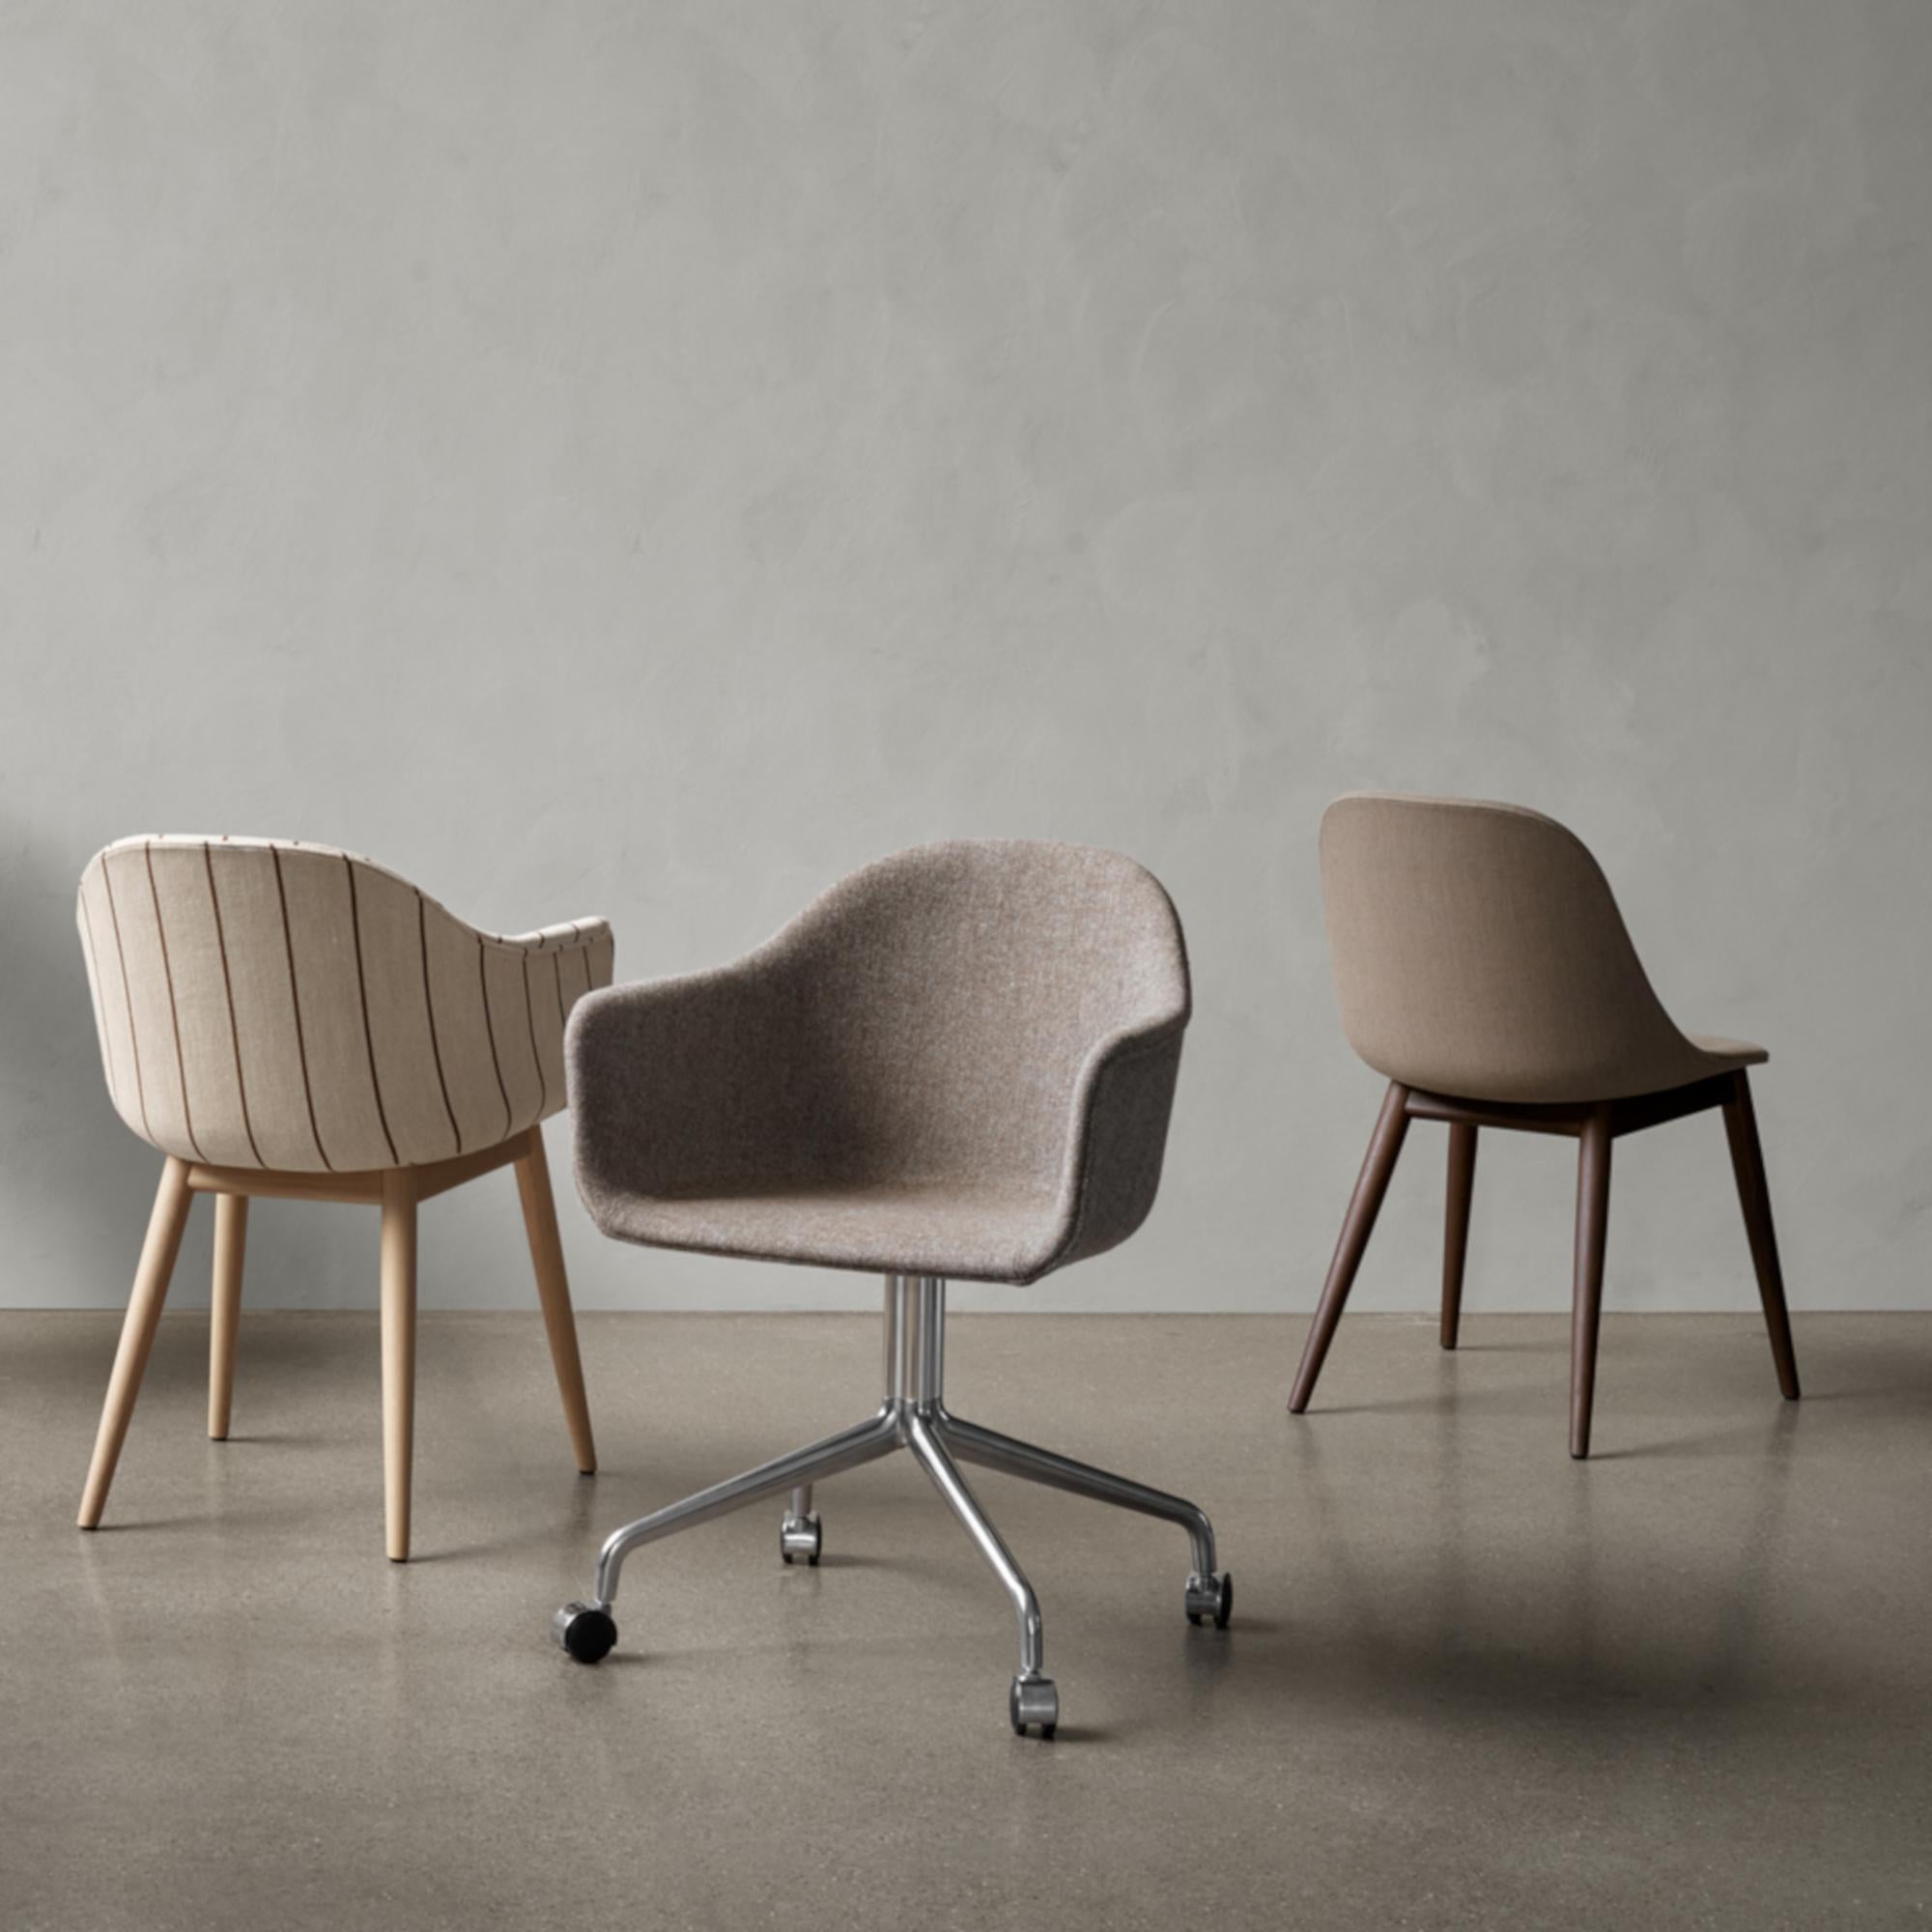 Conceived during the design process for Menu’s new creative destination menu space located in Copenhagen’s thriving Nordhavn (Northern Harbour) area, the Harbour chair is the result of fulfilling a variety of needs (among others) comfortable